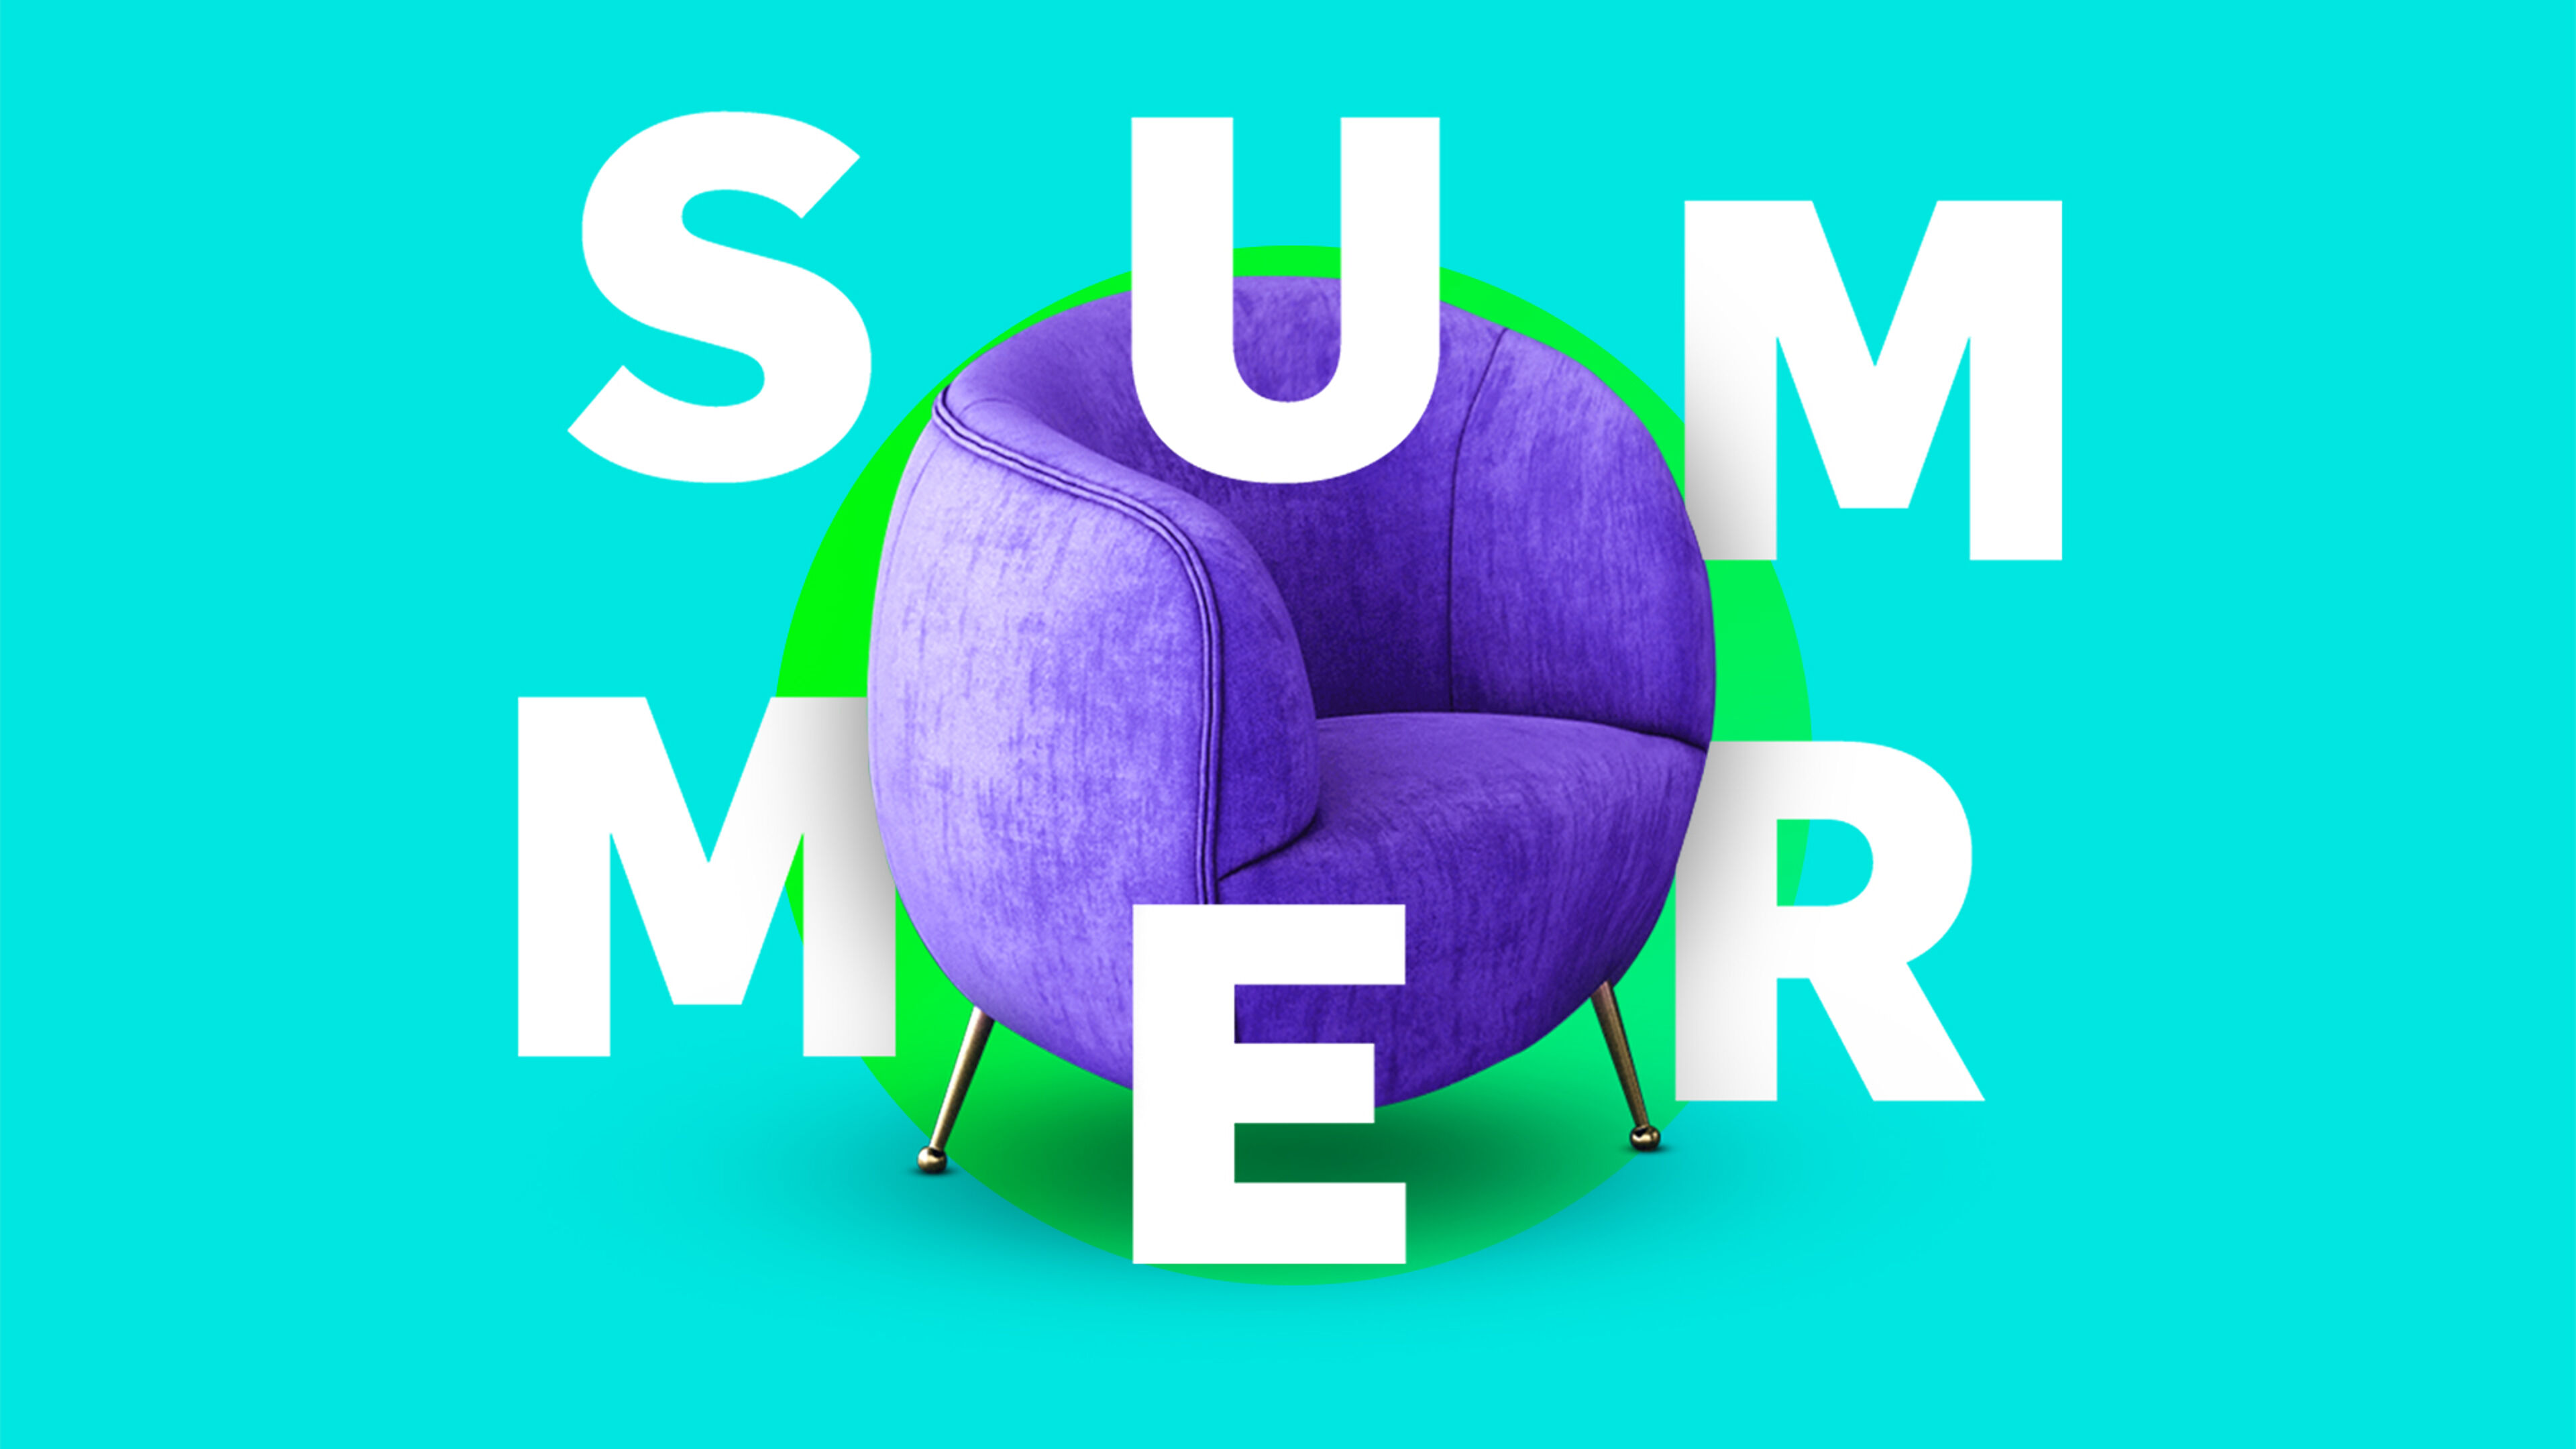 The word 'SUMMER' overlaid on a turquoise background with a stylish purple chair at the center